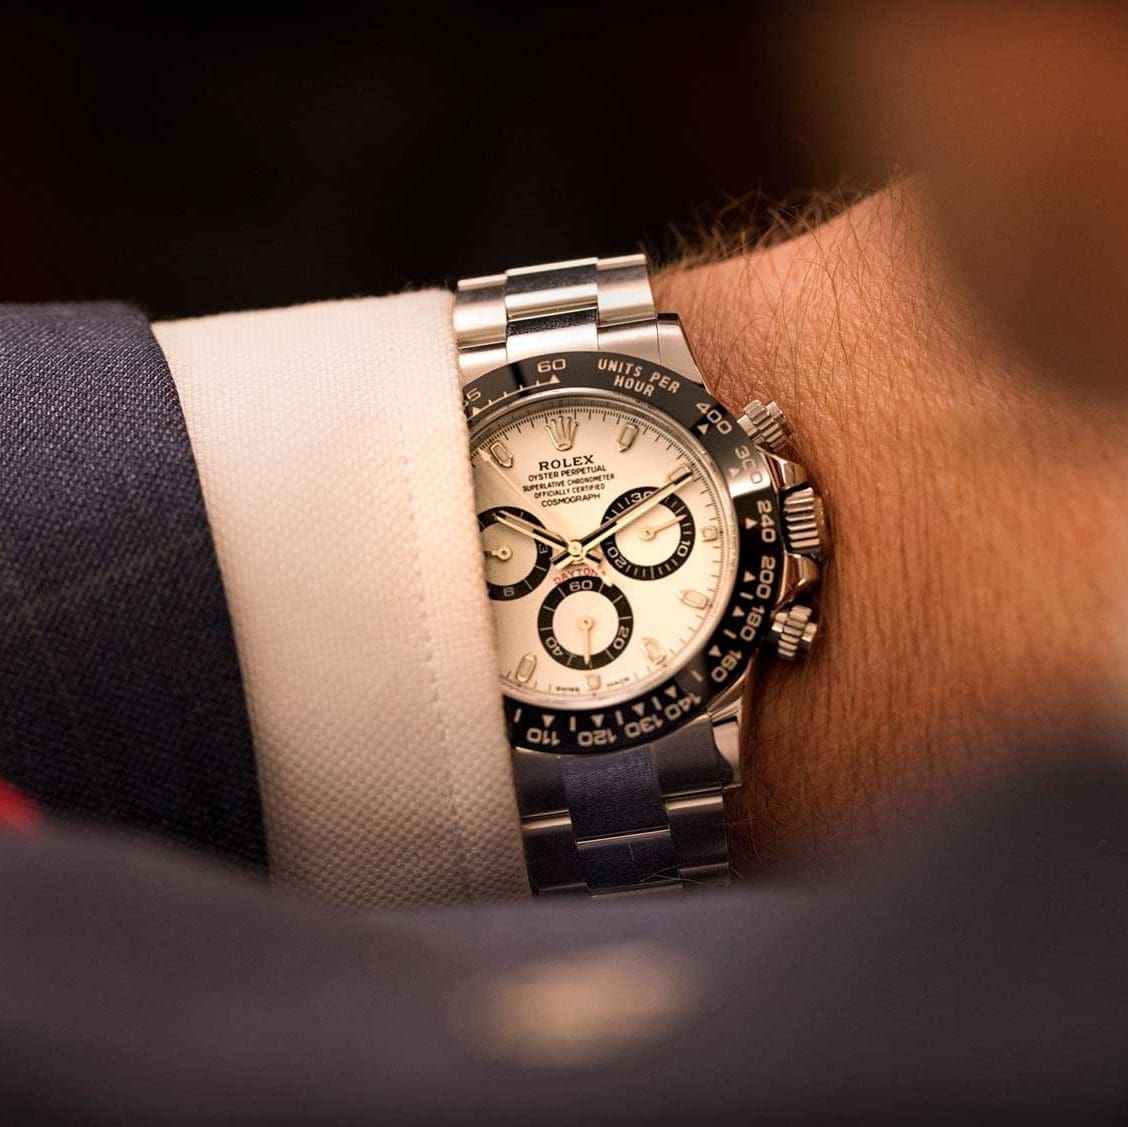 The link between crypto and collectible watches is becoming clearer